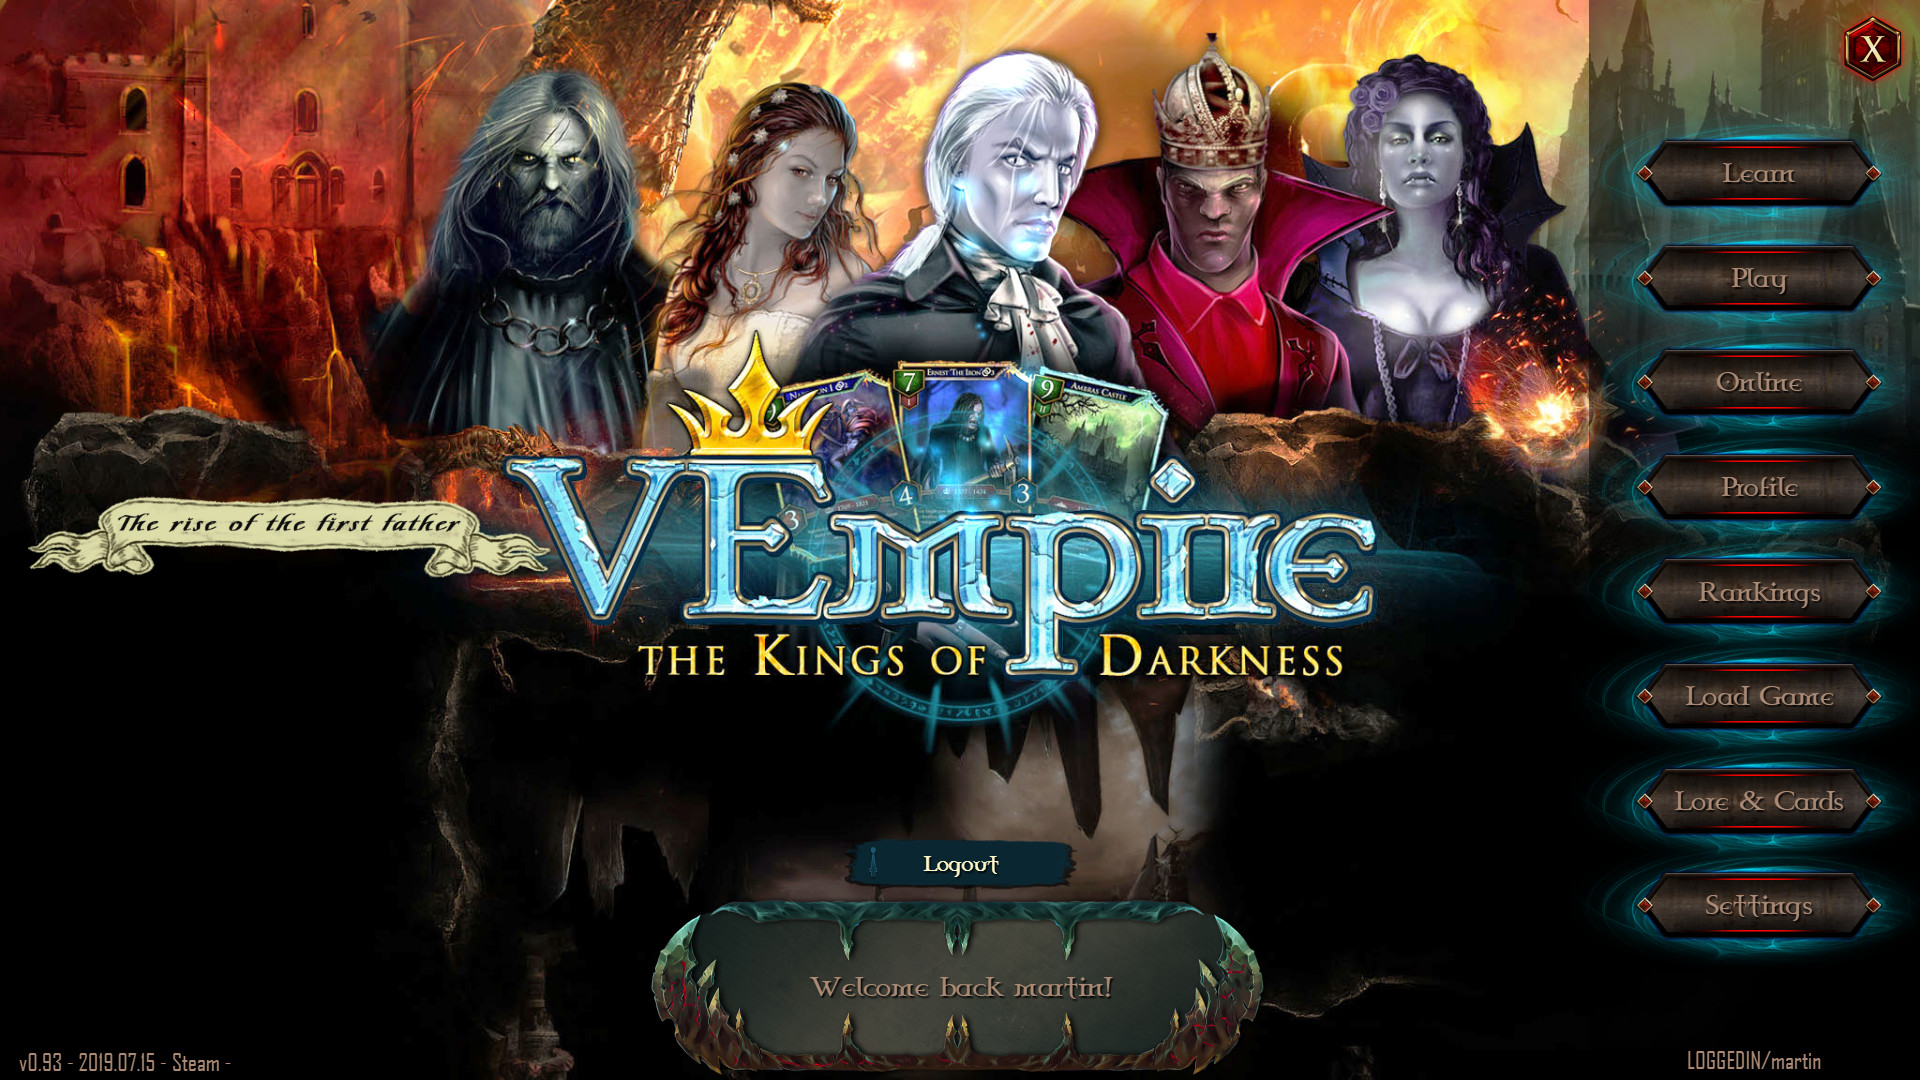 VEmpire - The Kings of Darkness screenshot